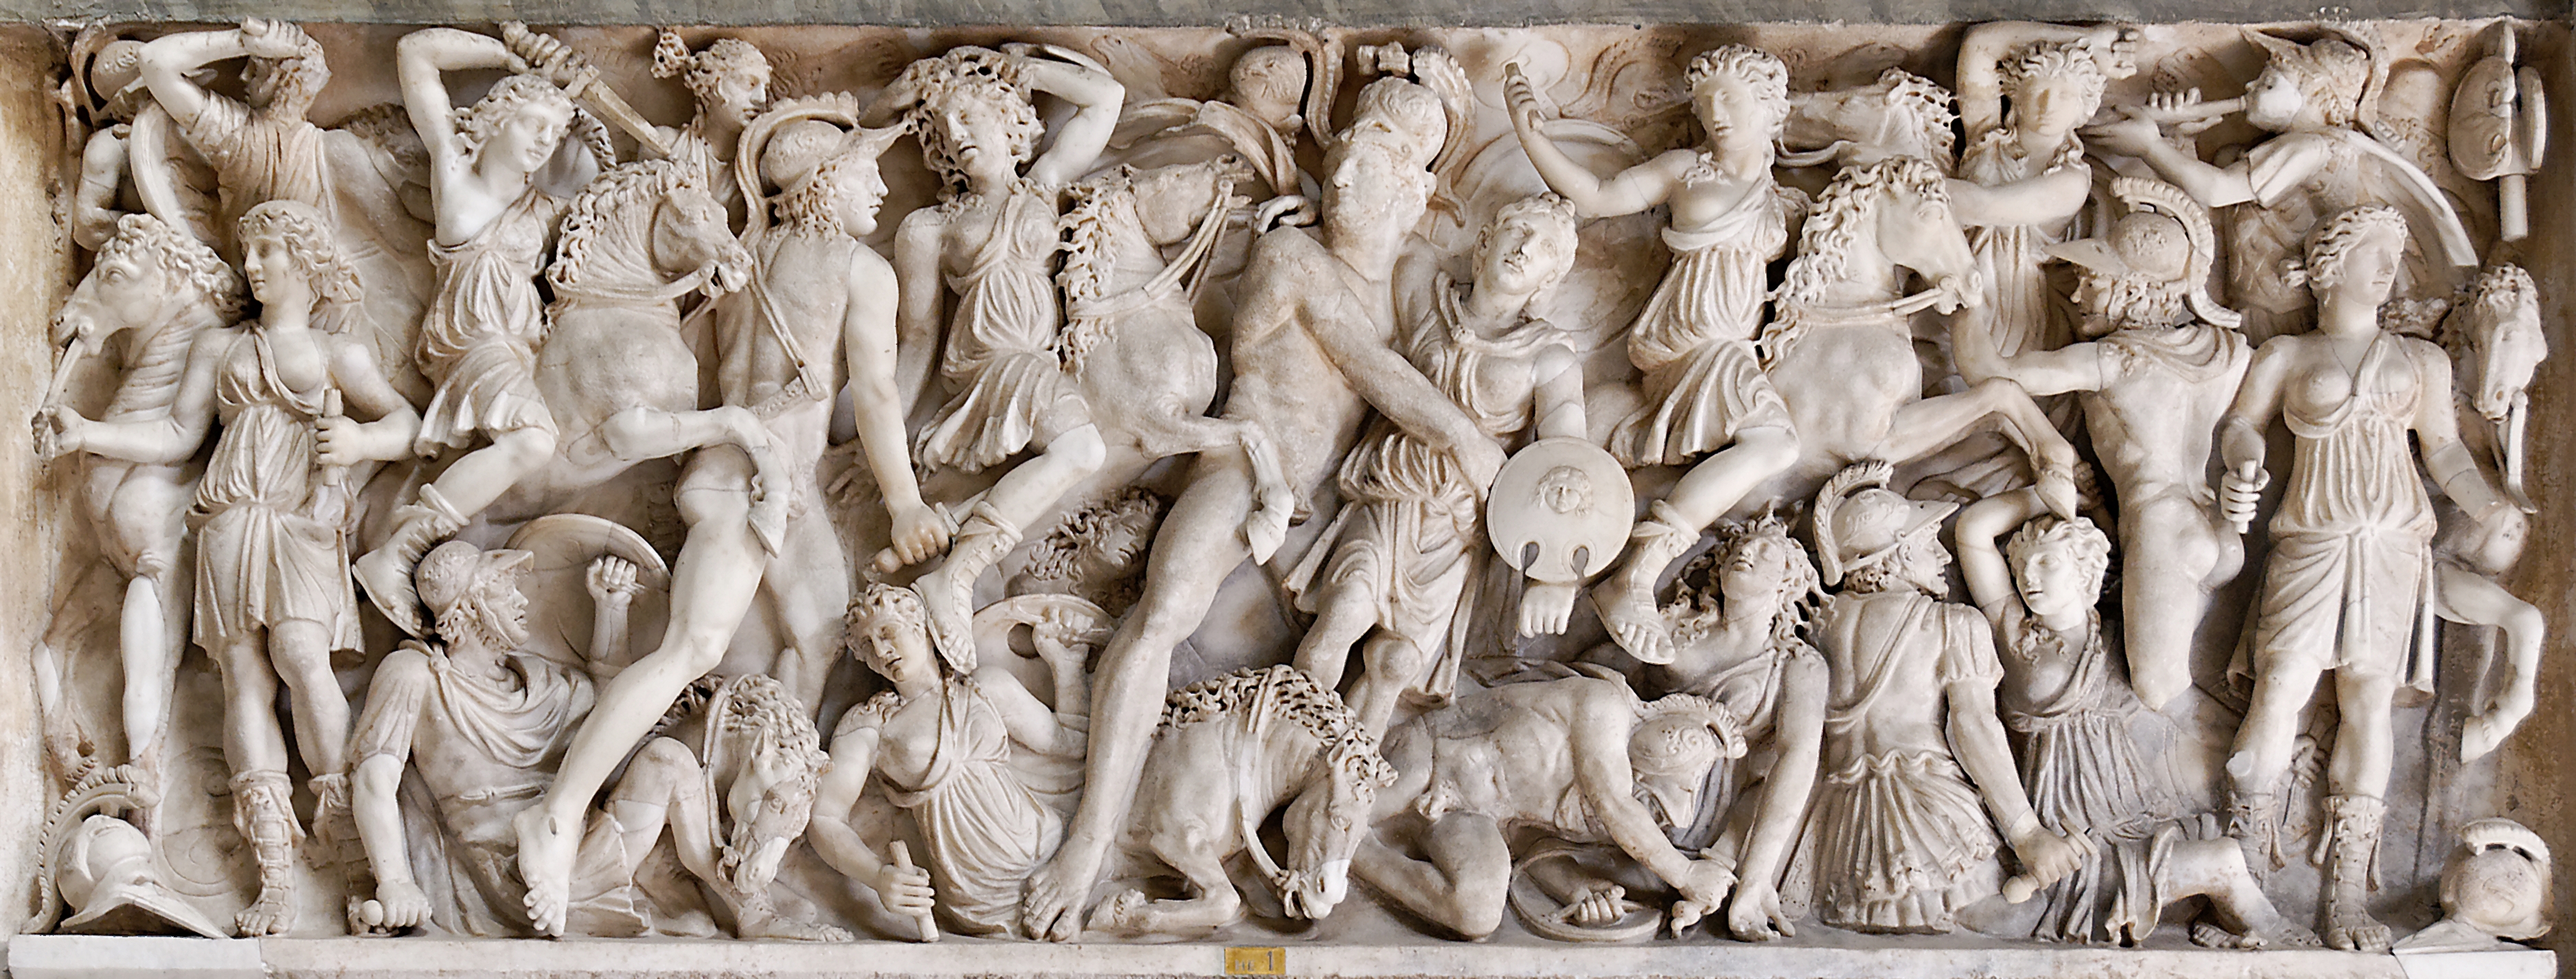 Sarcophagus with depiction of Achilles and Penthesileia (c.230-240 CE). Marble, Rome.